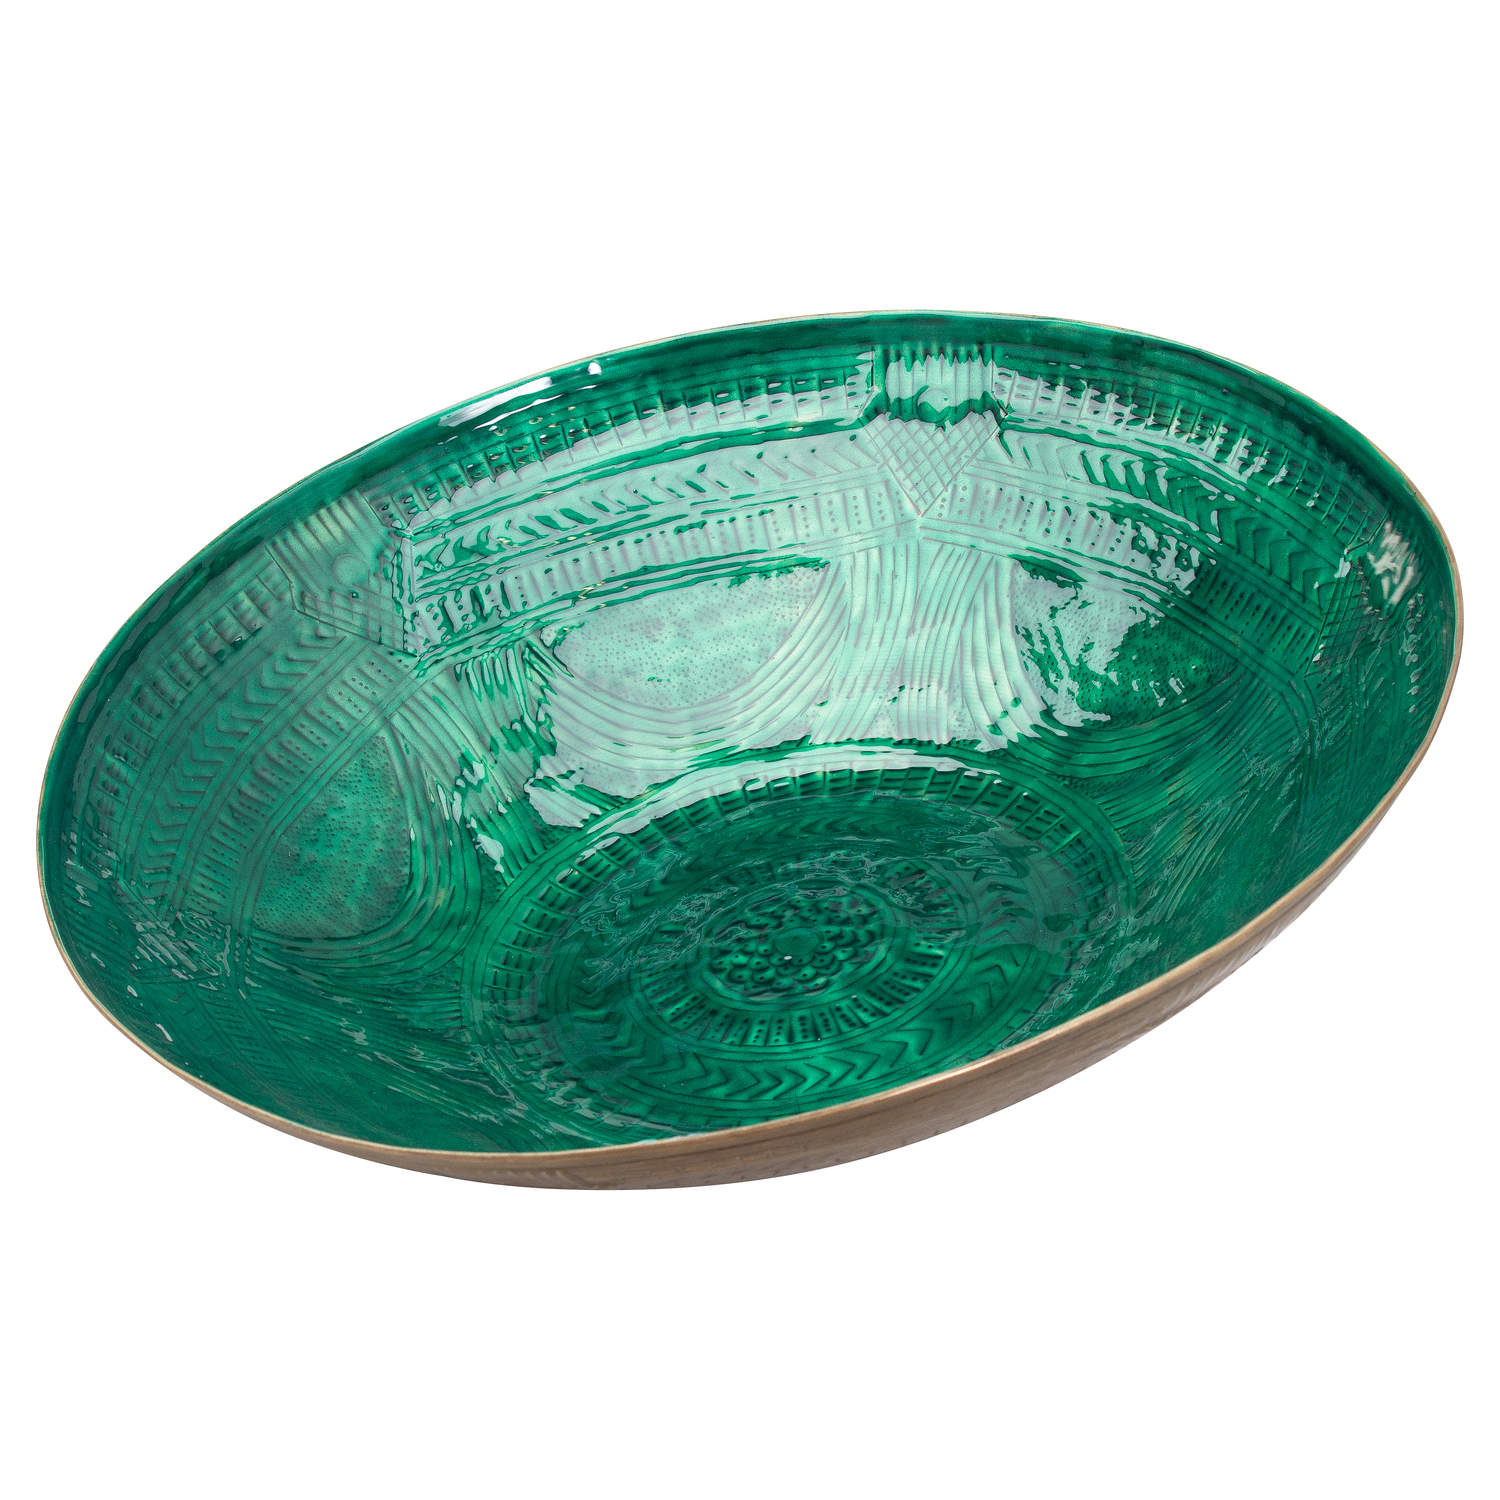 Aztec Collection Brass Embossed Ceramic Dipped Bowl